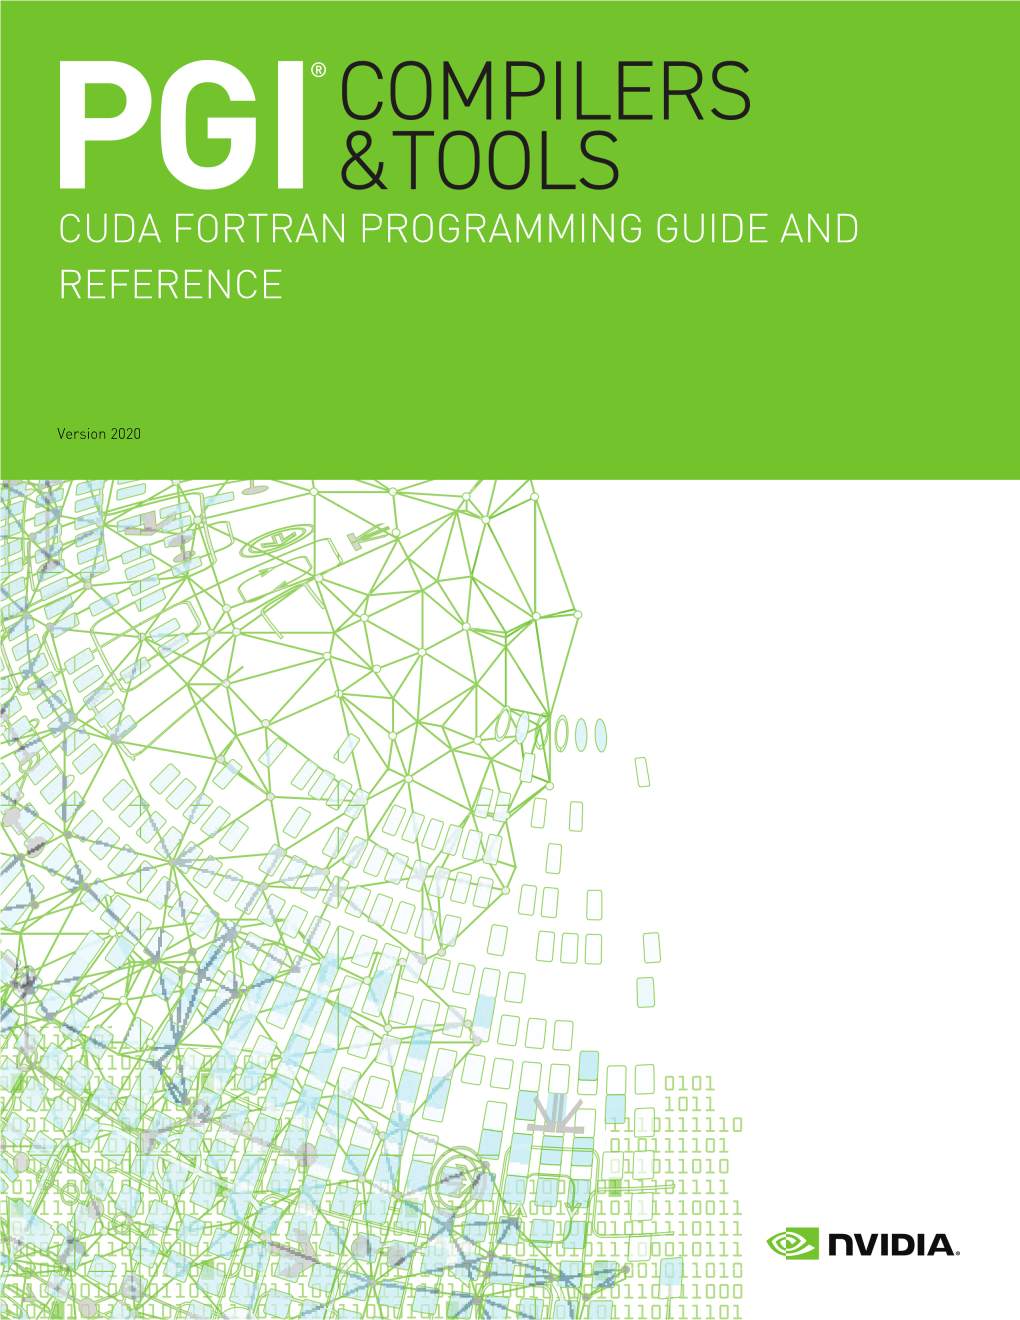 Cuda Fortran Programming Guide and Reference